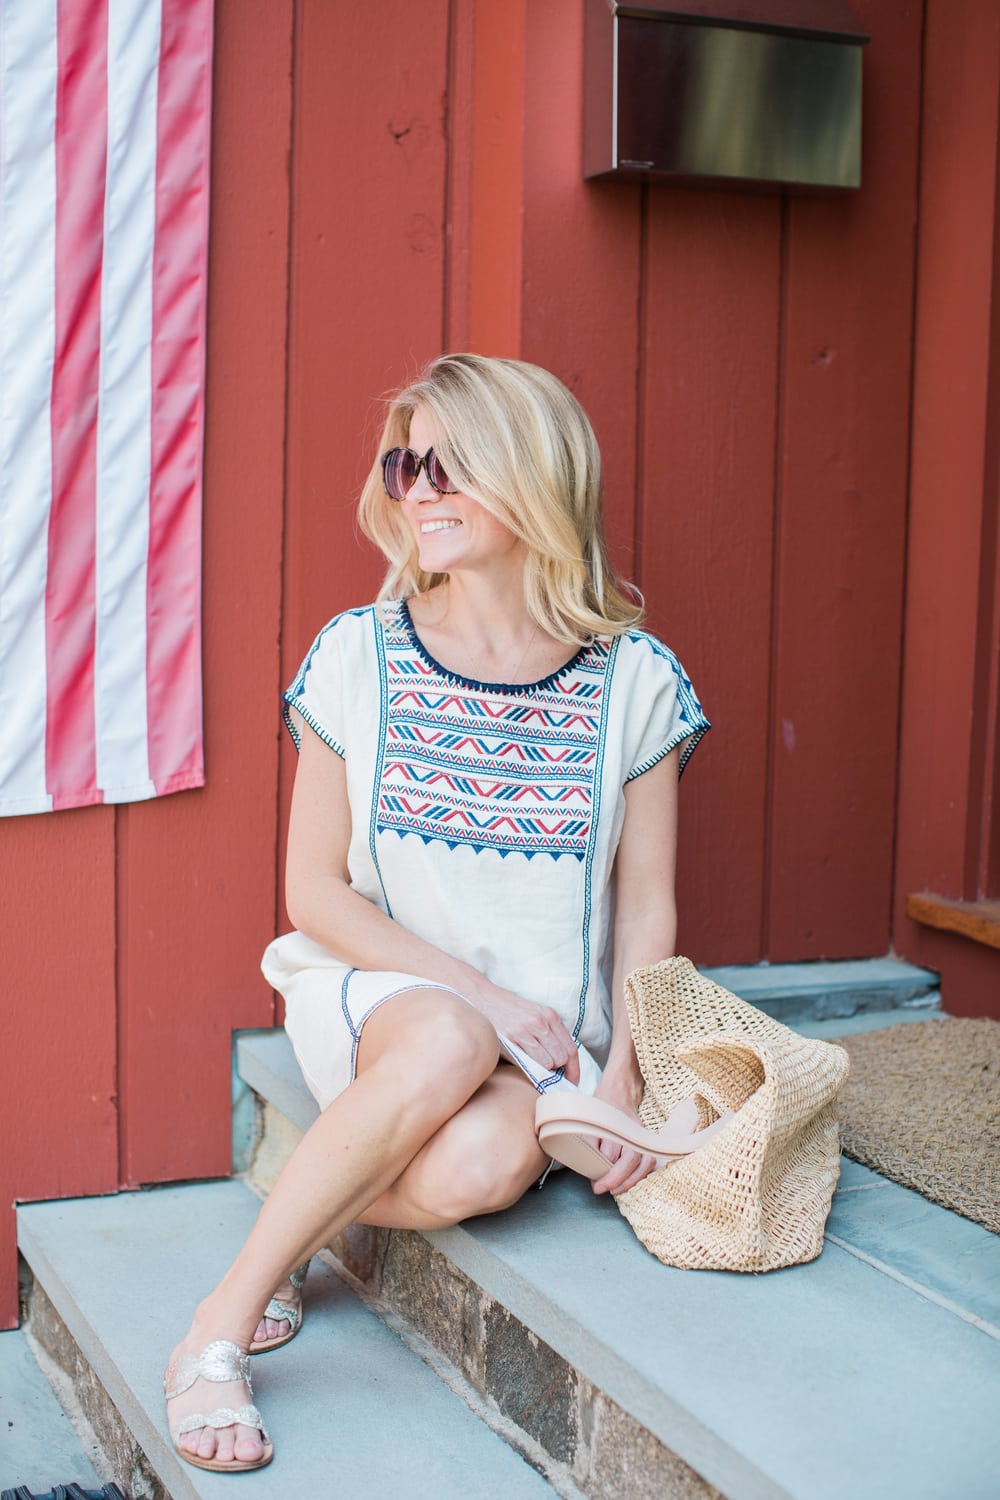 RED, WHITE & BLUE SHIFT DRESS/BEACH COVER-UP